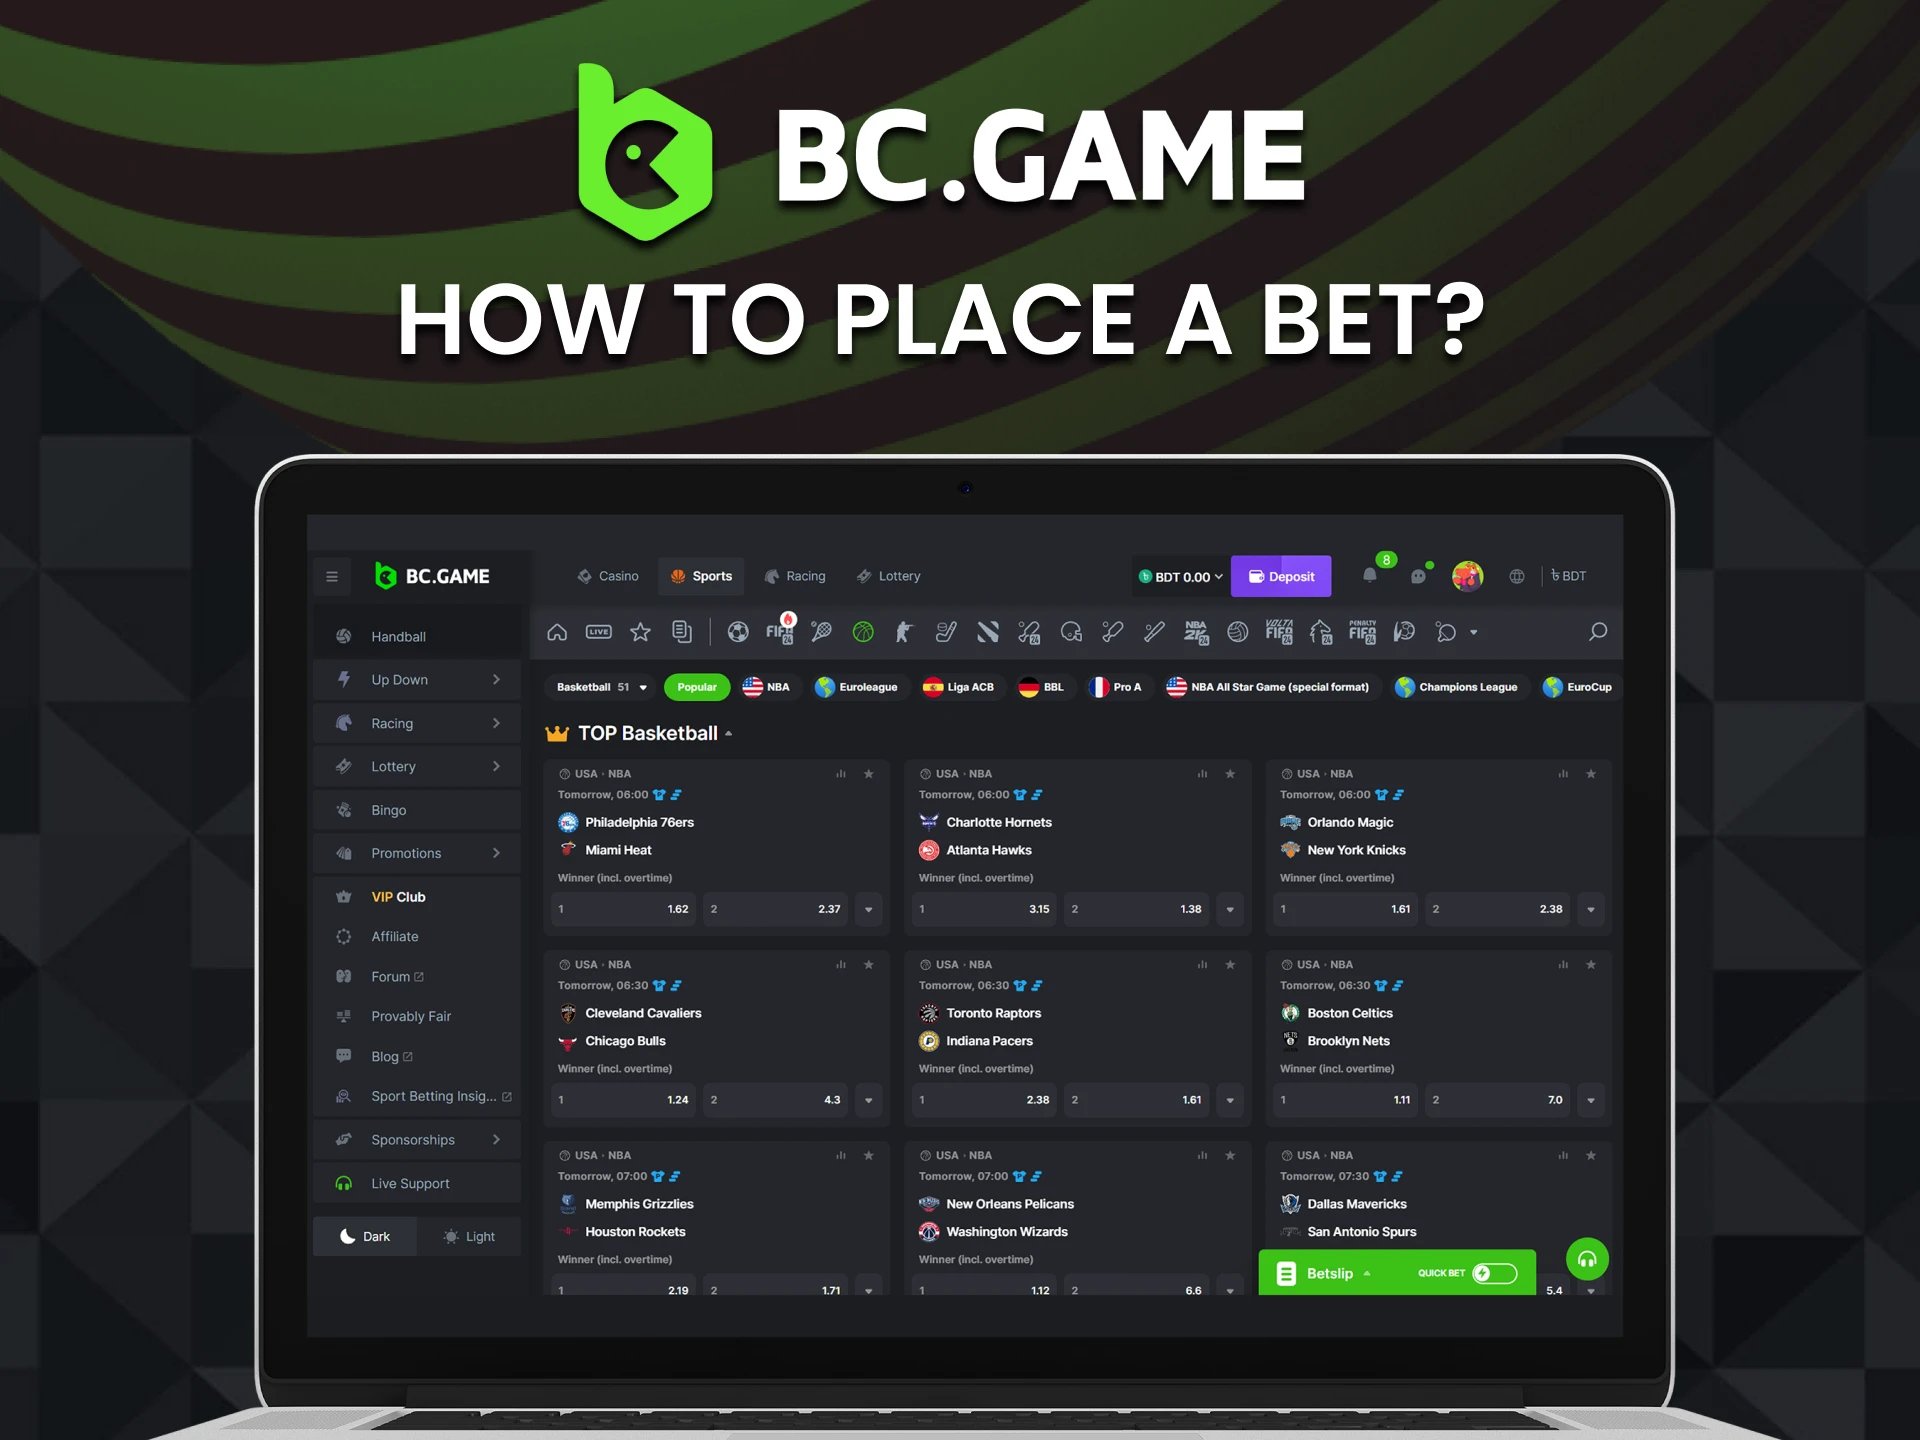 We'll show you how to bet on BCGame.